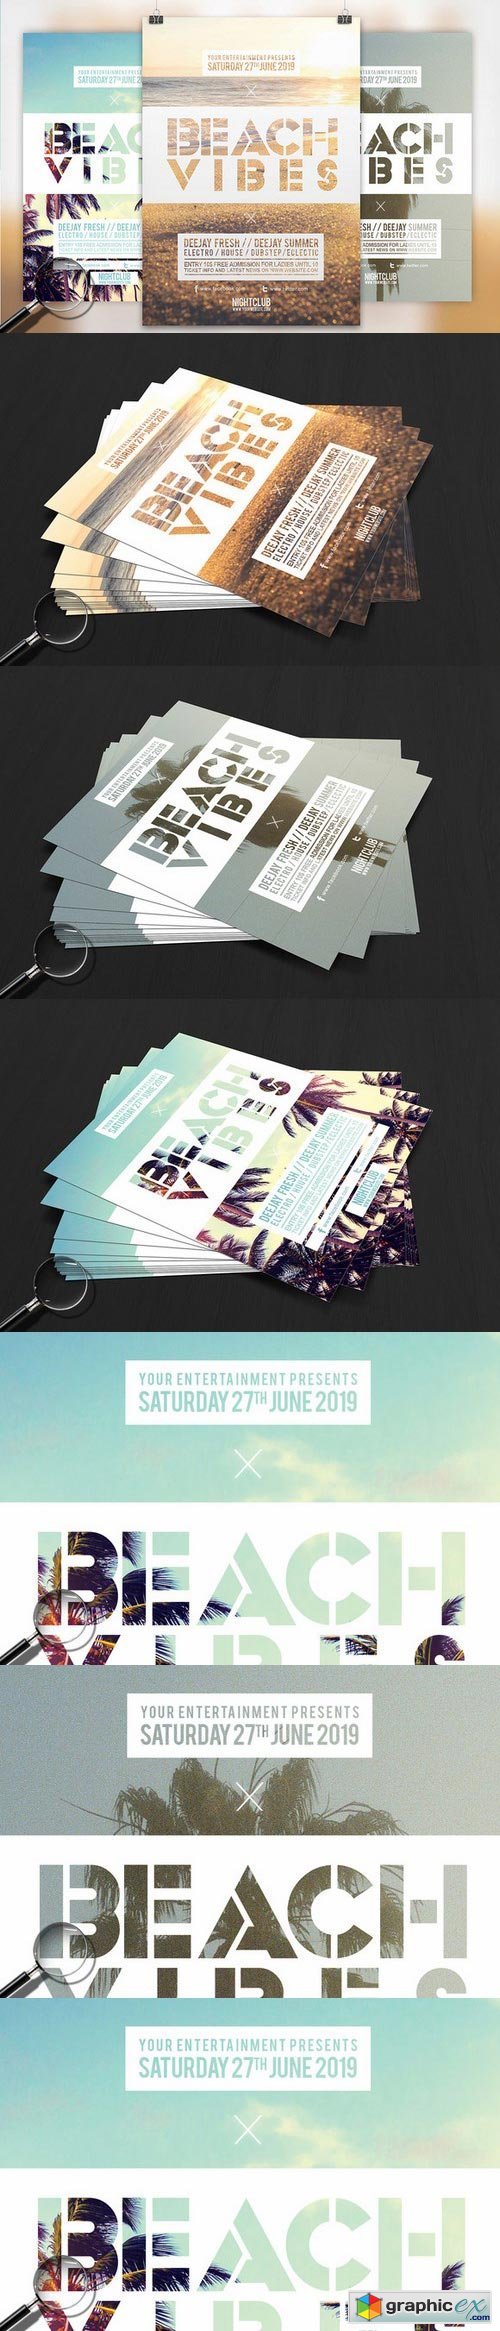 Beach Vibes | 3in1 Flyer Template